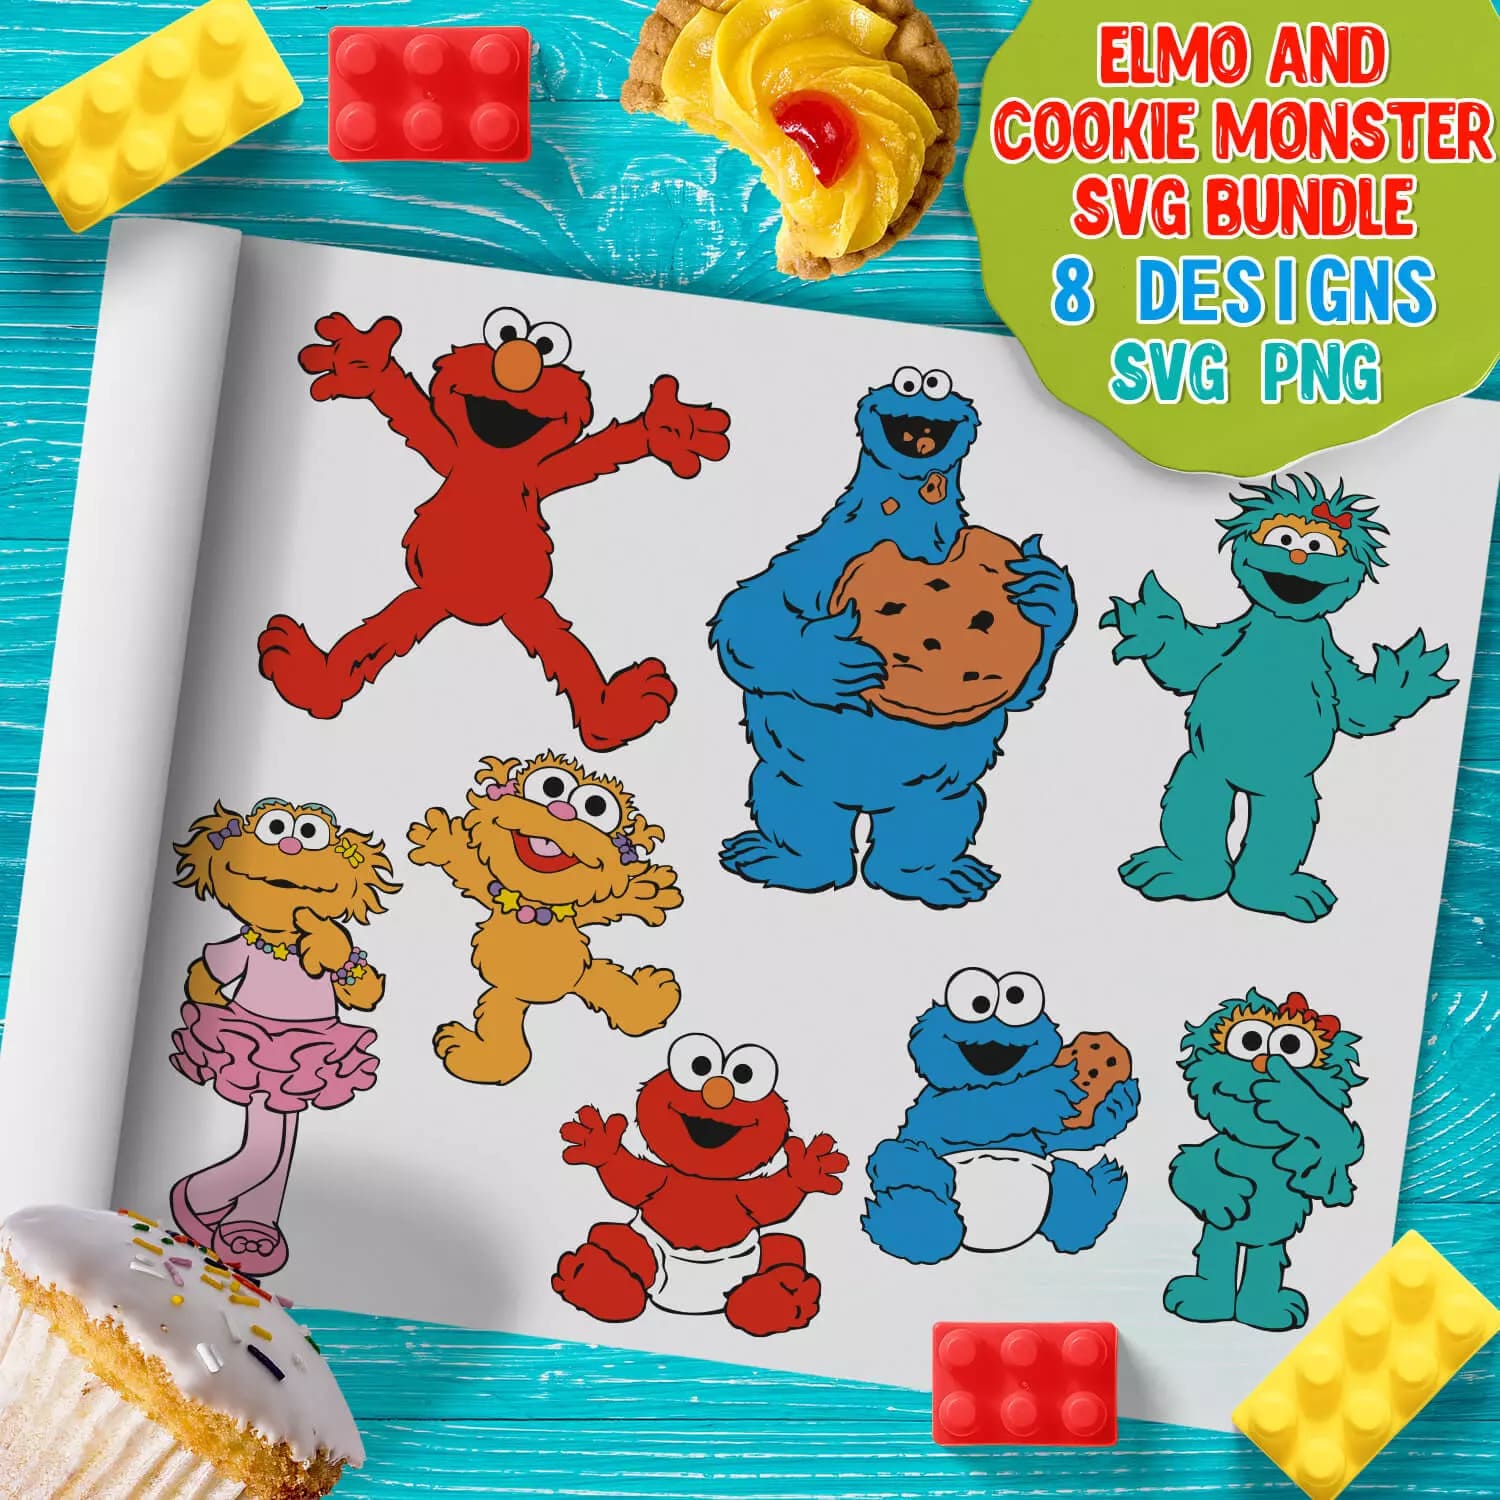 Elmo And Cookie Monster SVG Preview 2.